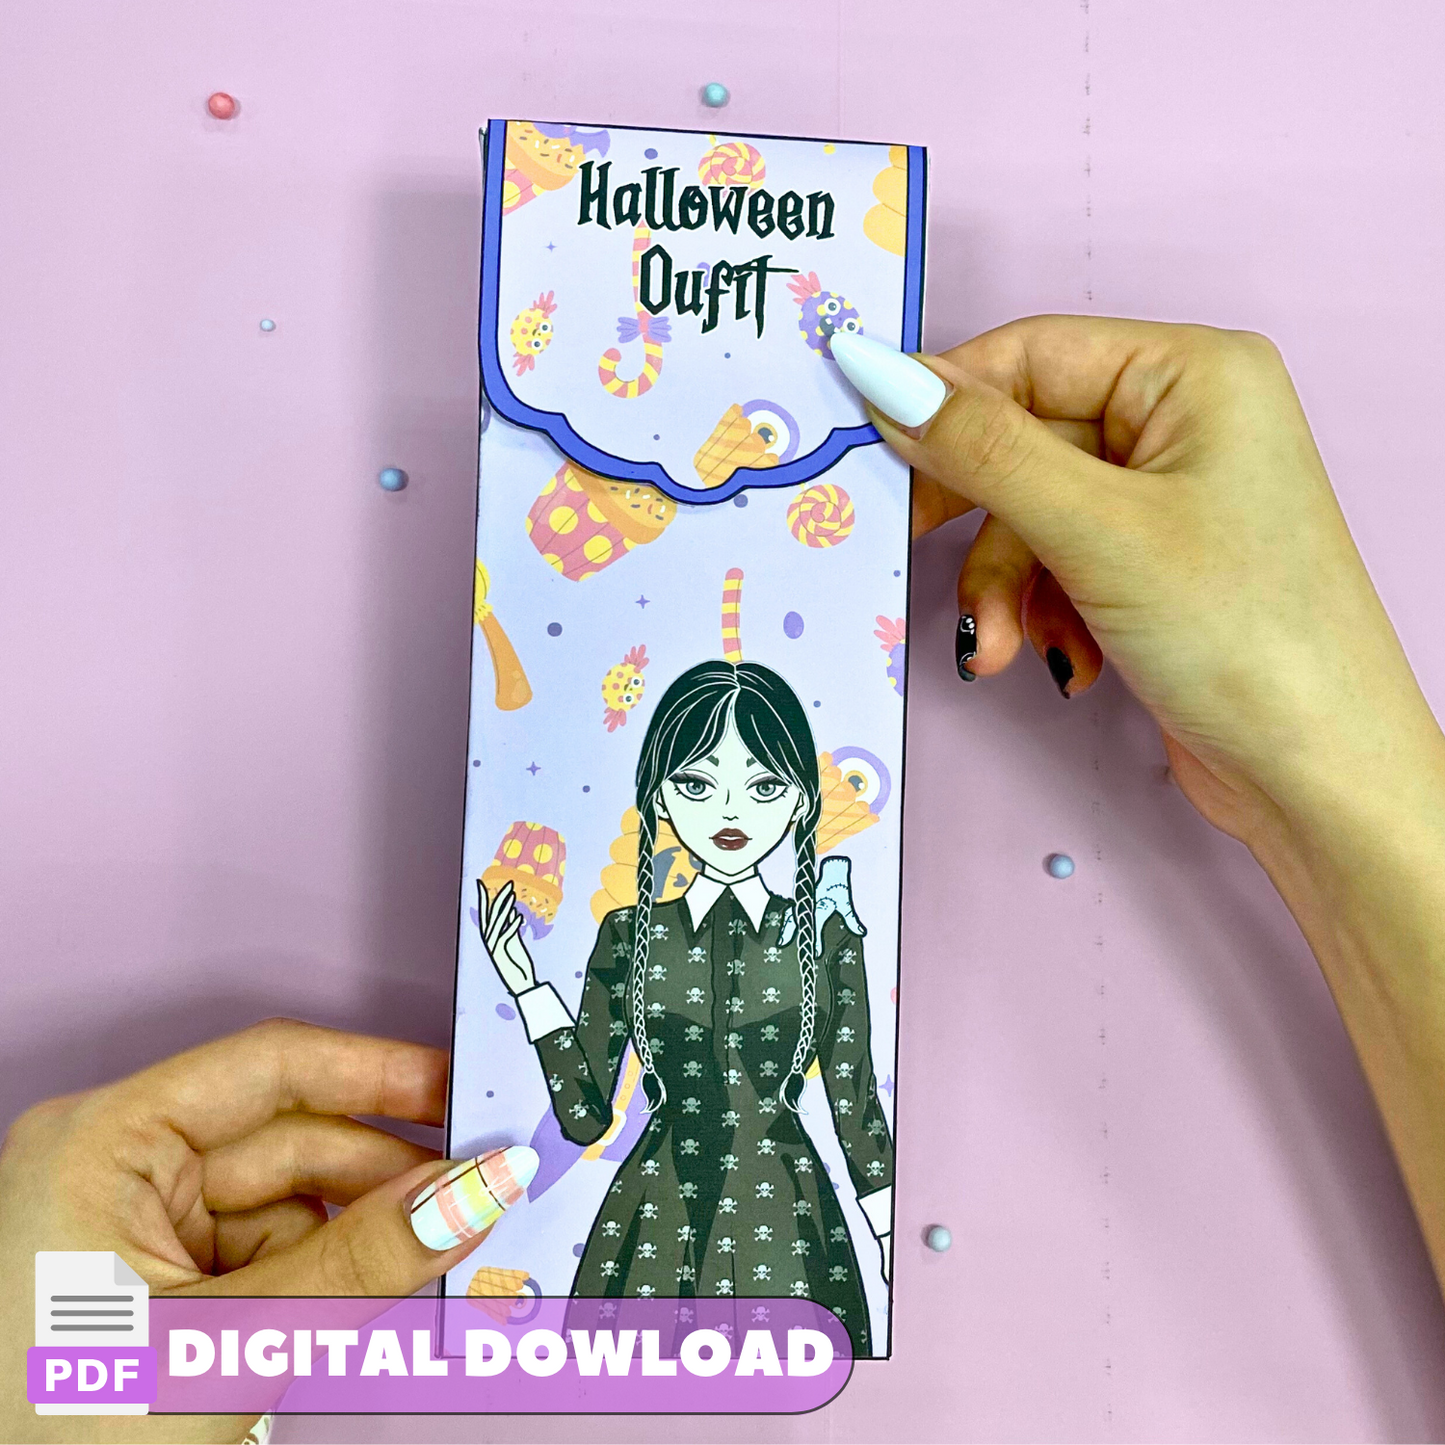 Printable Wednesday Dolls Dress up Kit 🌈 Gothic Doll Digital Template for Kids | Mystery Wardrobe, Paper Crafts DIY 🌈 Woa Doll Crafts